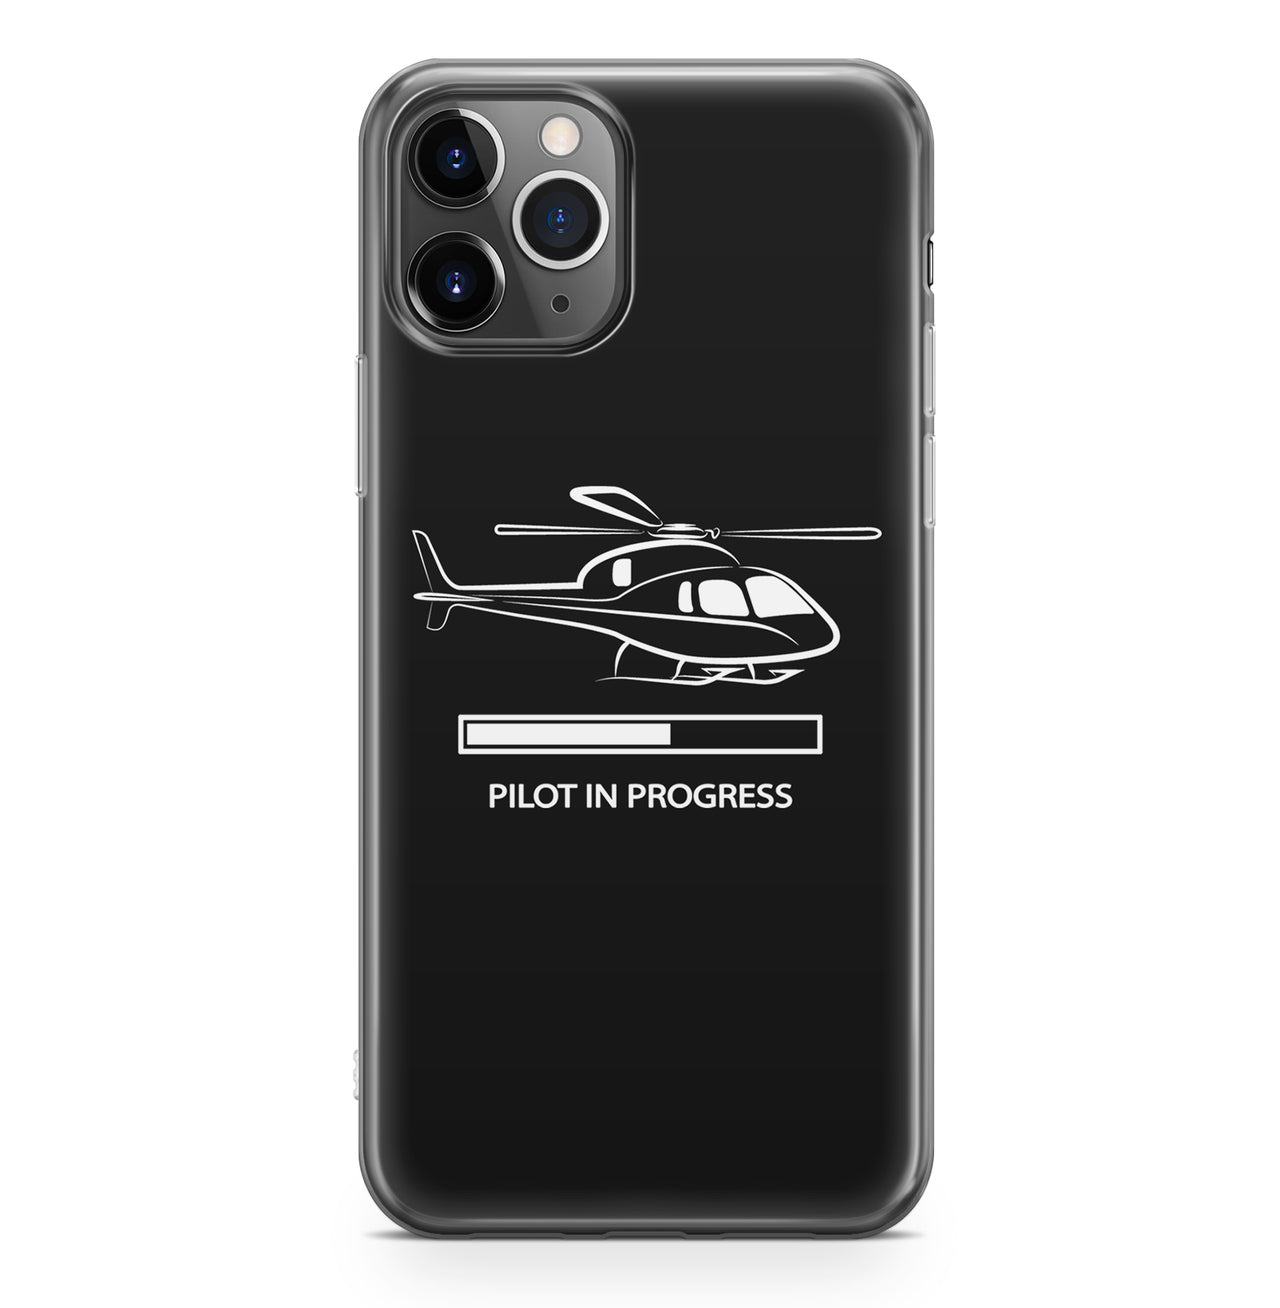 Pilot In Progress (Helicopter) Designed iPhone Cases